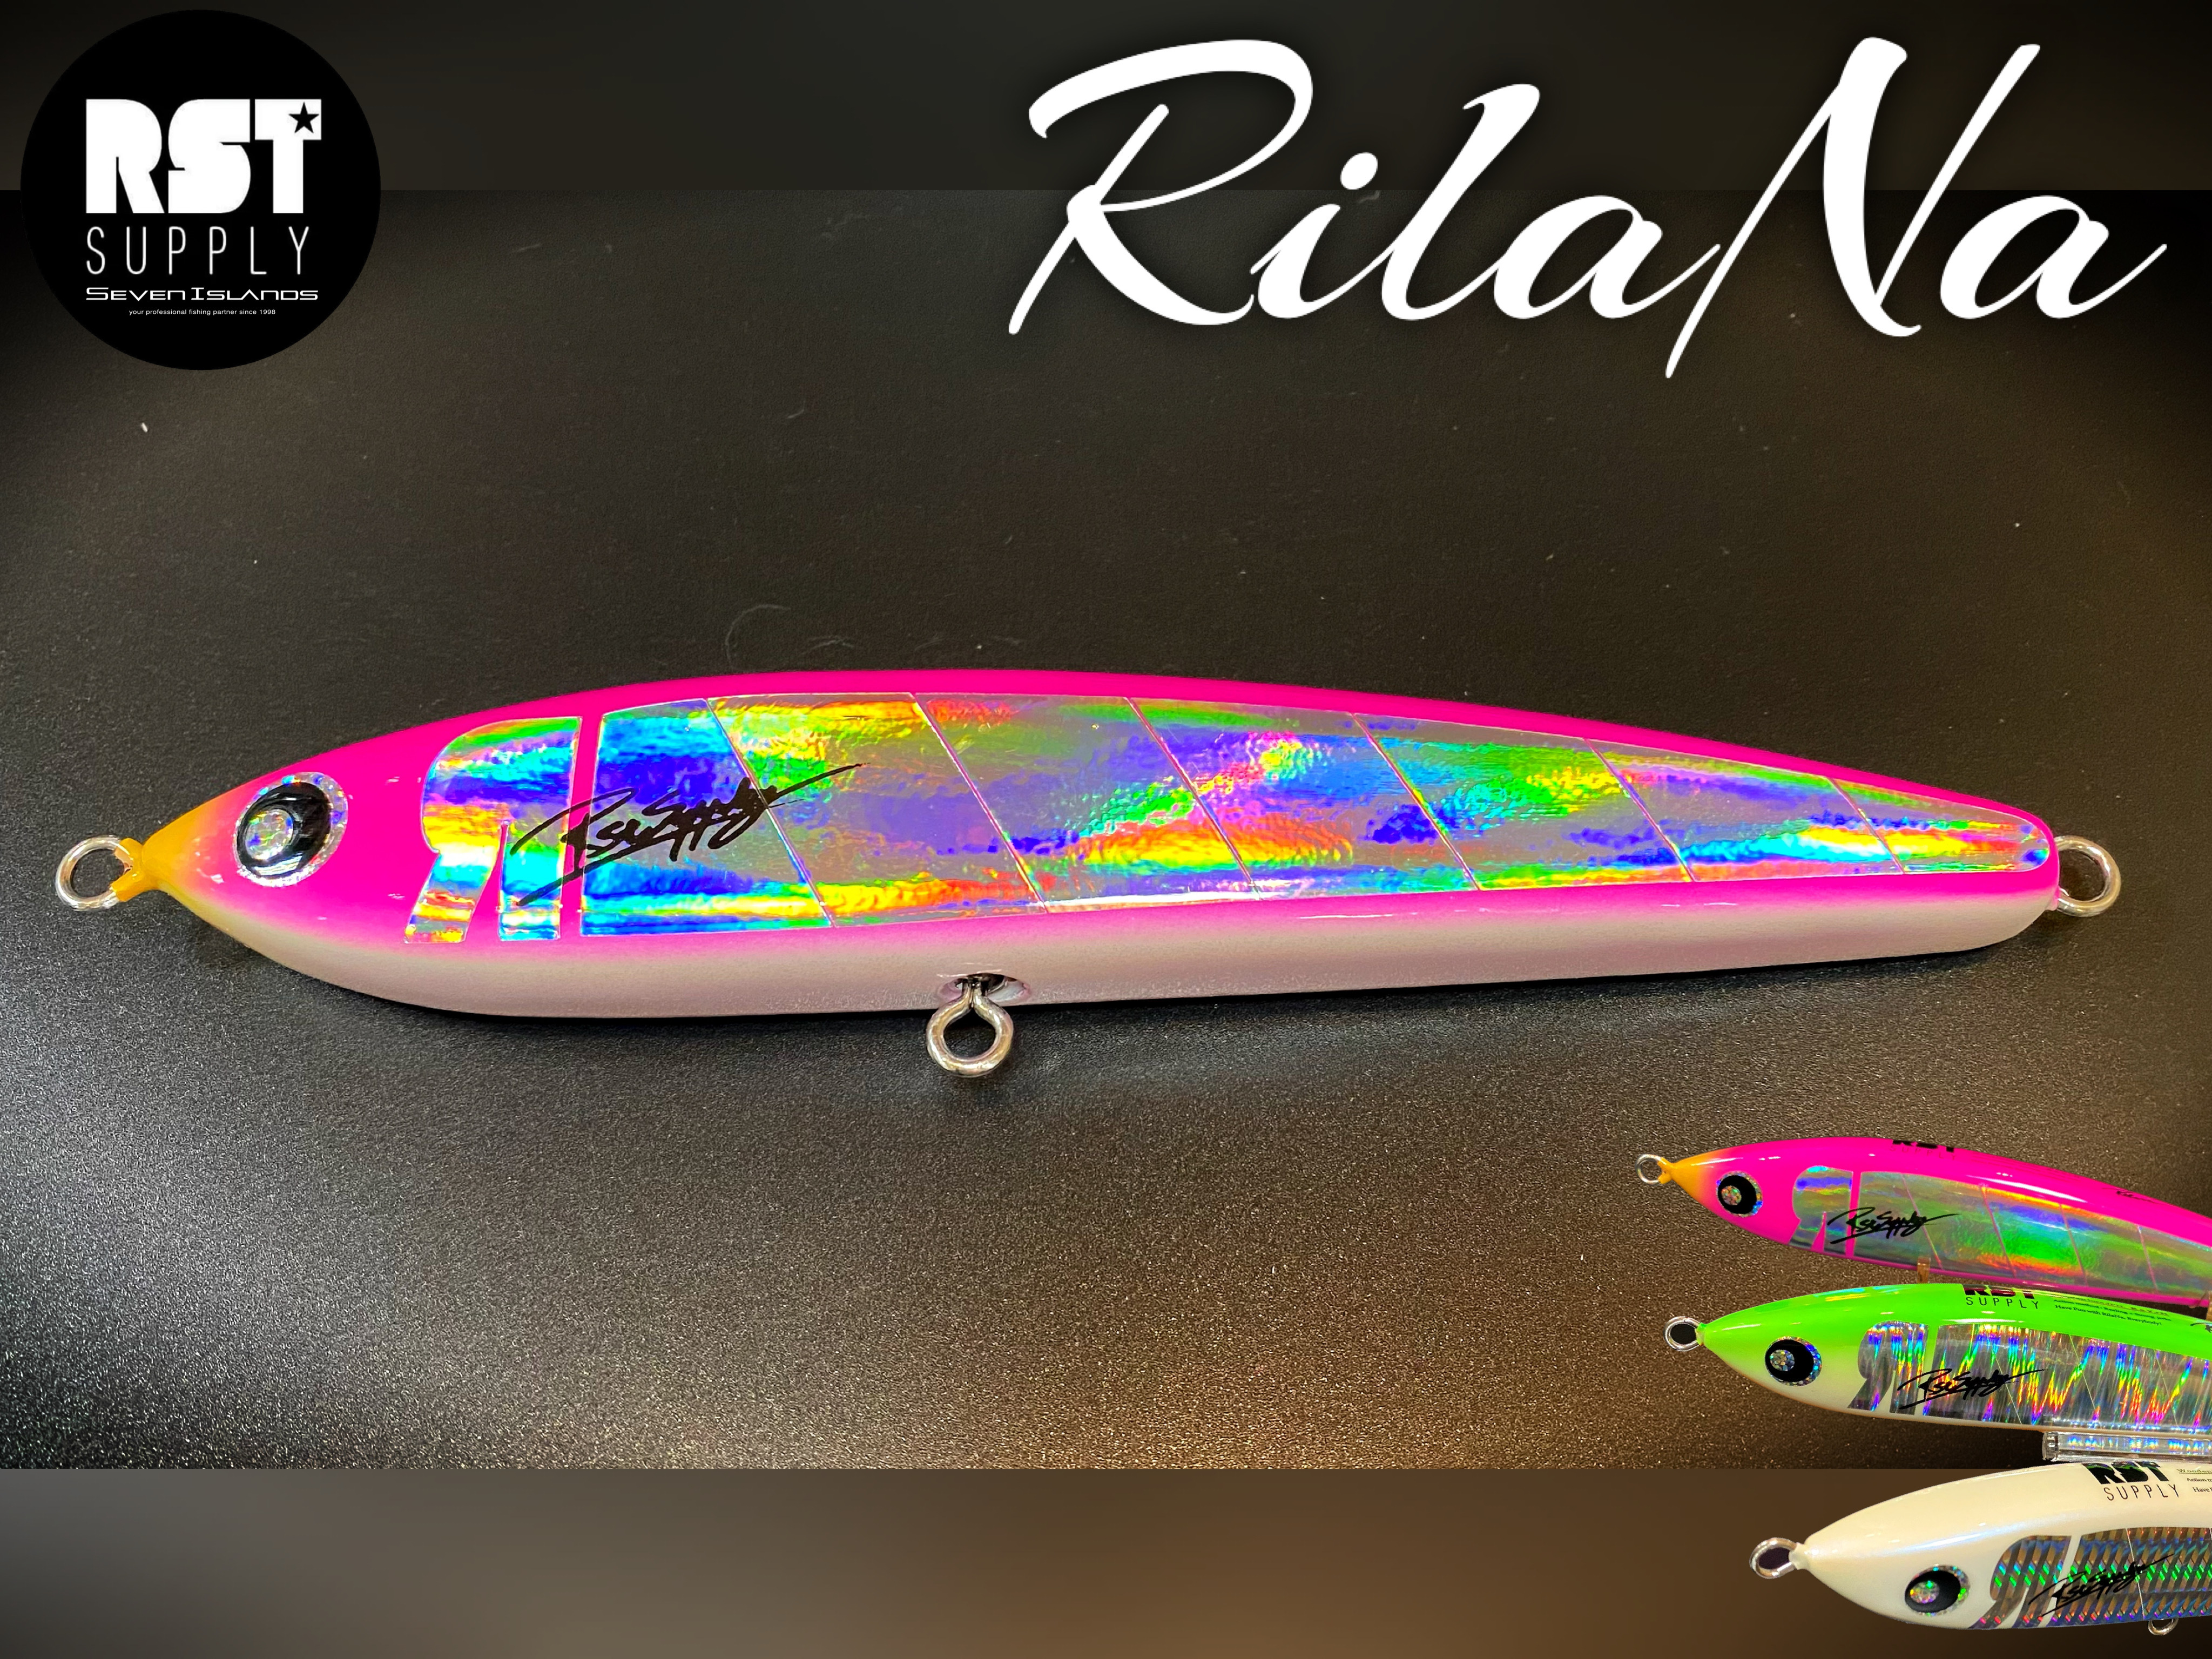 RST SUPPLY RilaNa 180 HAND-MADE CASTING WOODEN LURE 